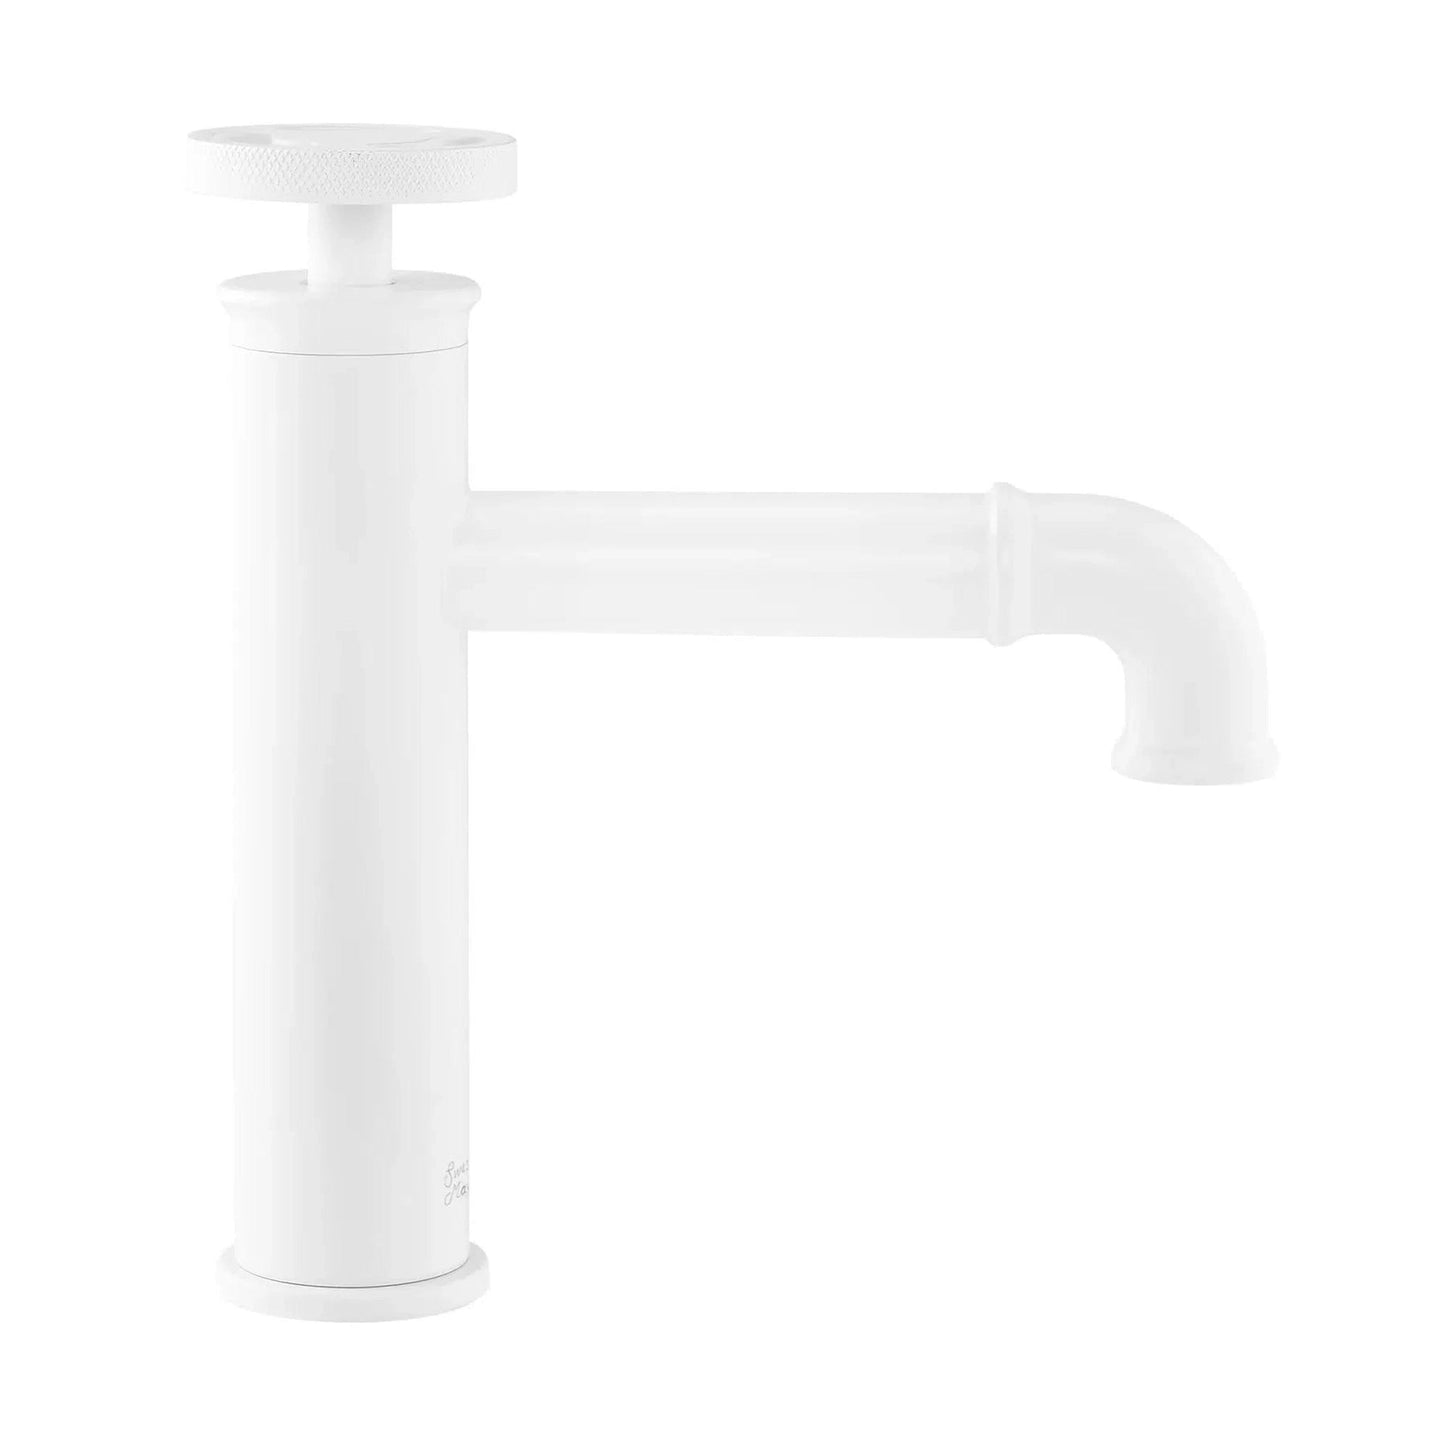 Swiss Madison Avallon 7" Single-Handle Matte White Bathroom Faucet With 1.2 GPM Flow Rate